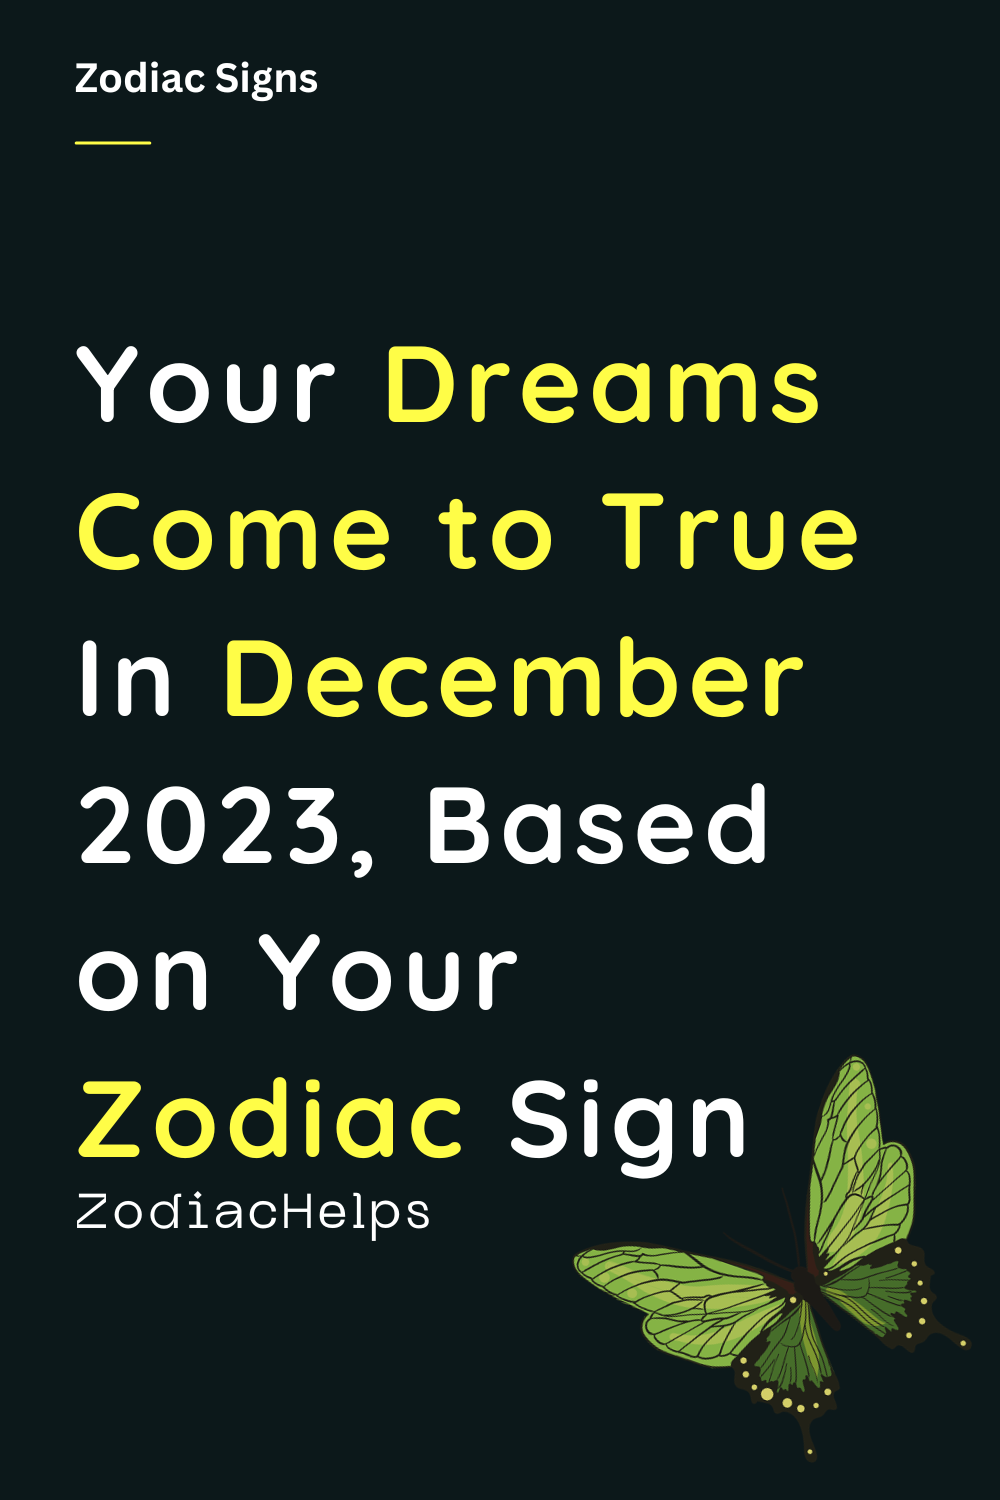 Your Dreams Come to True In December 2023, Based on Your Zodiac Sign